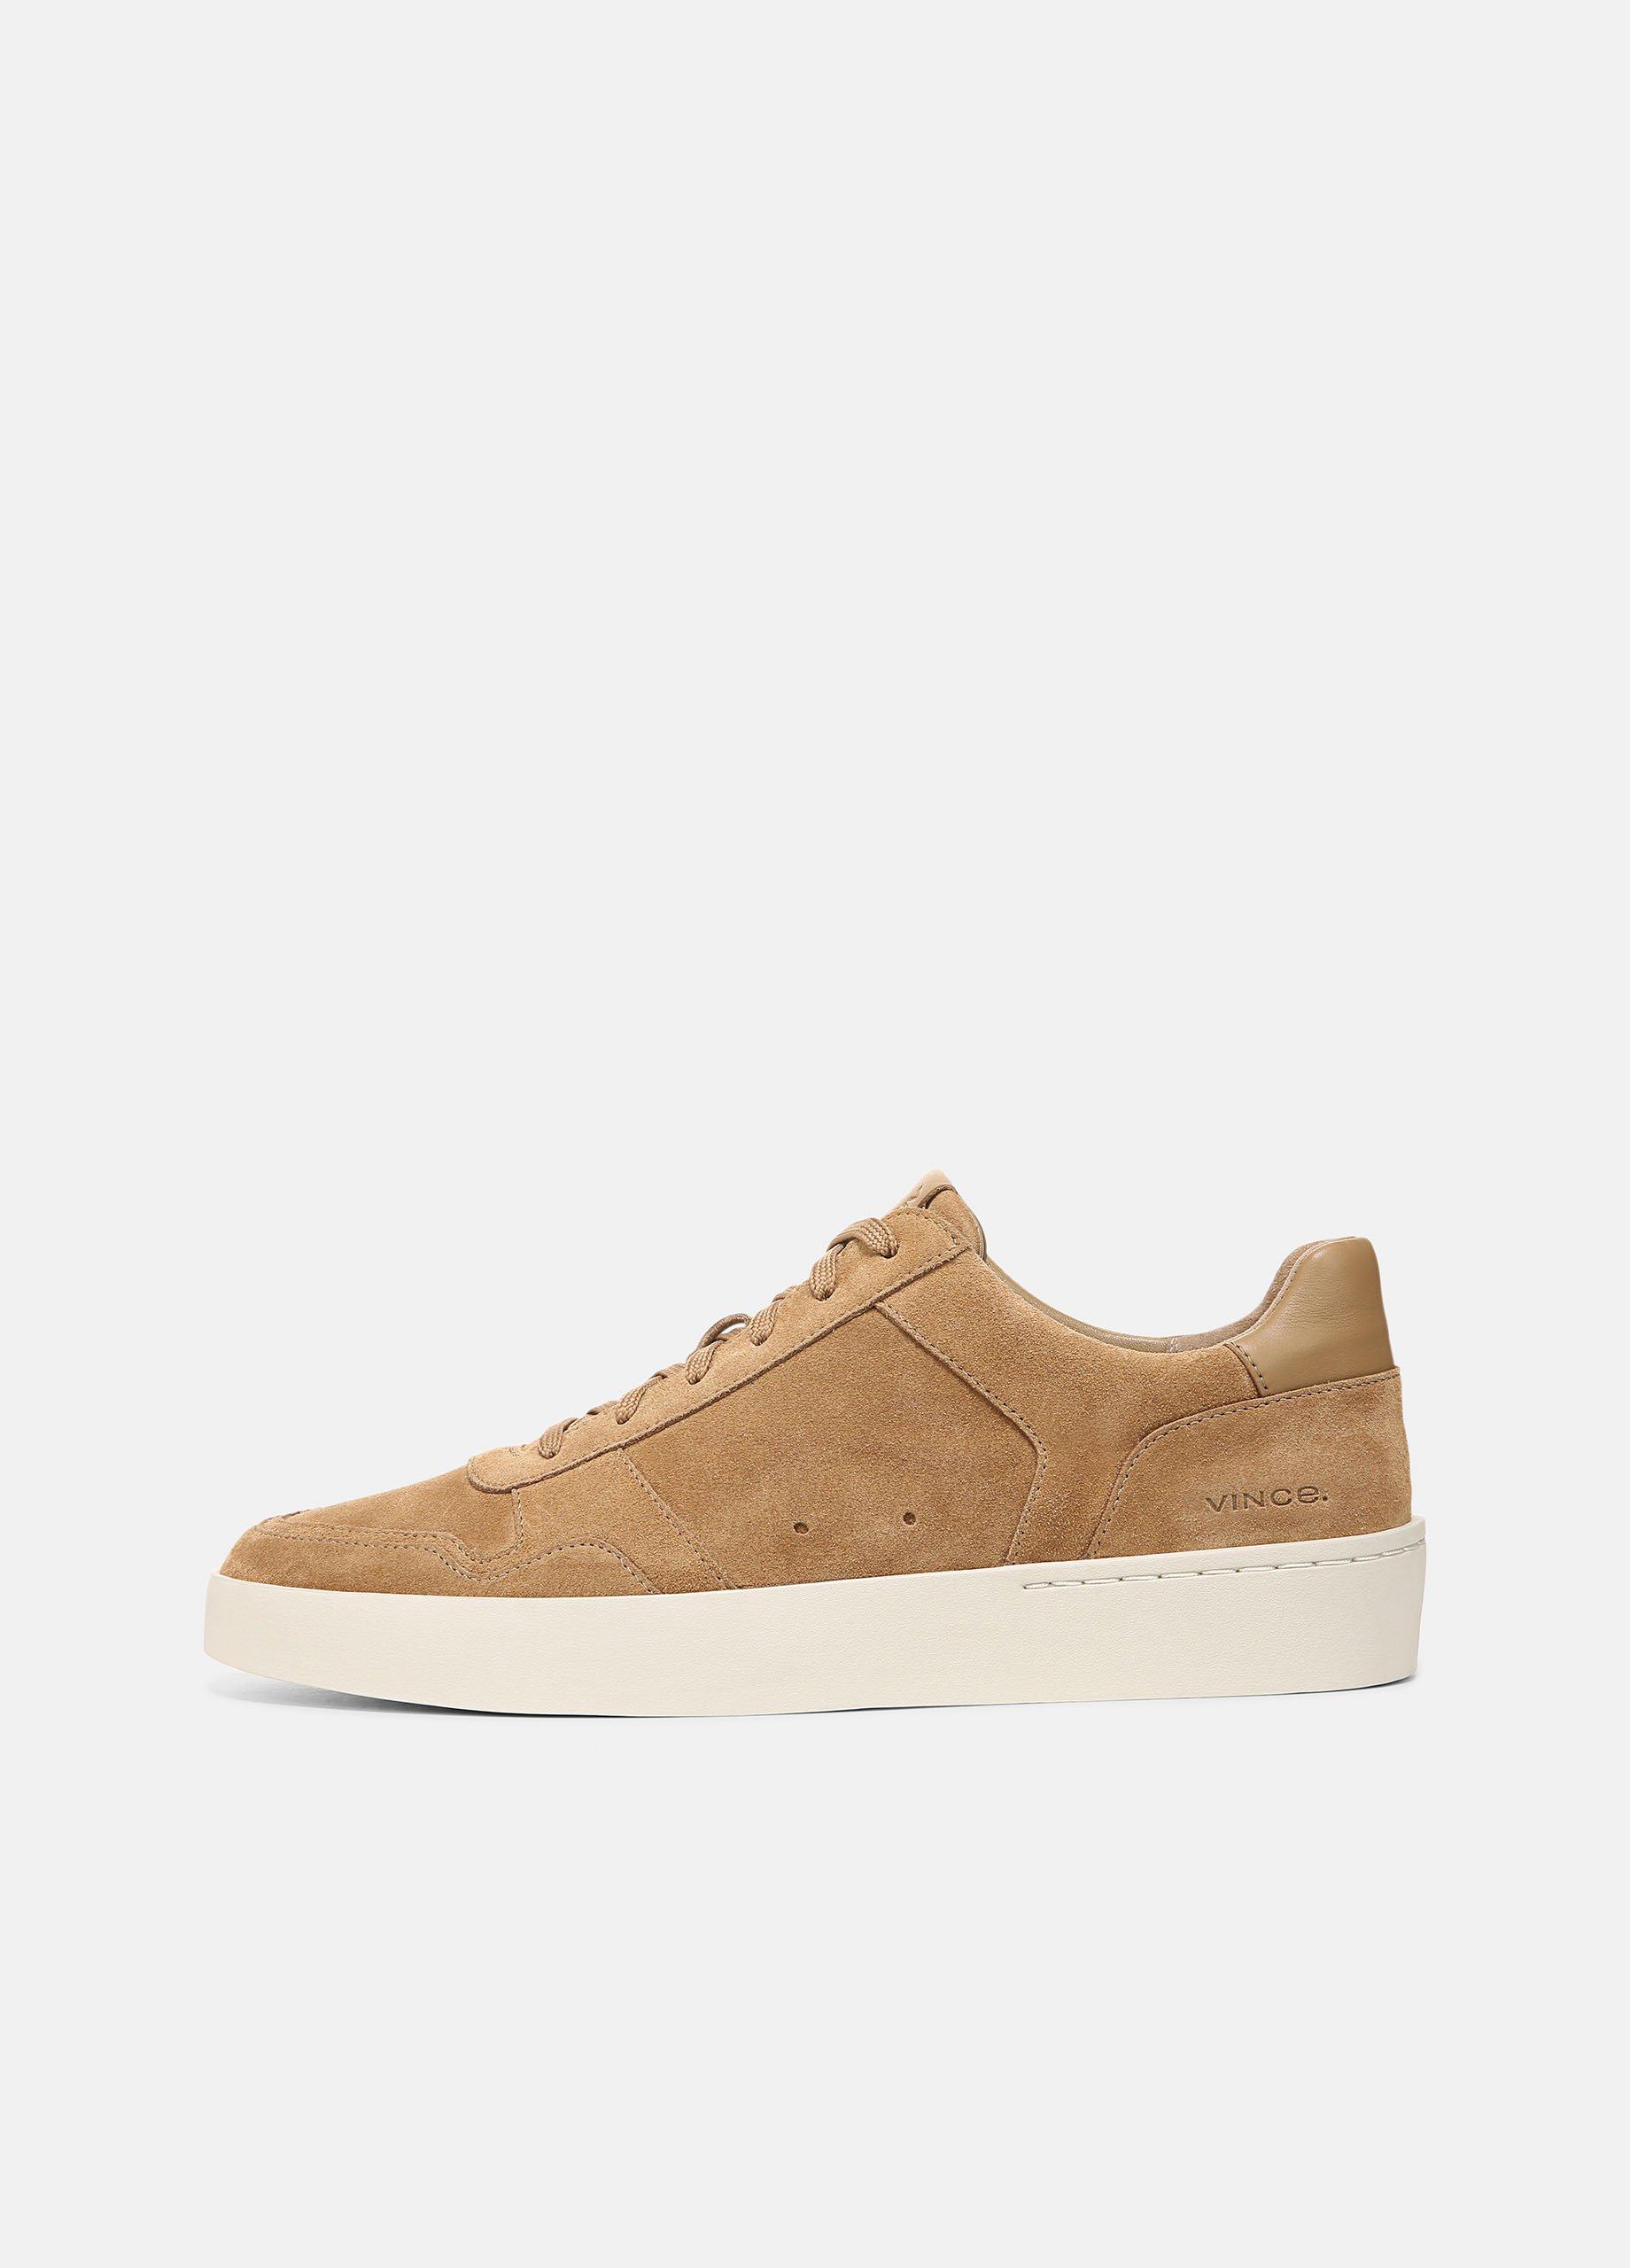 Peyton Leather Lace-Up Sneaker, New Camel, Size 10 Vince